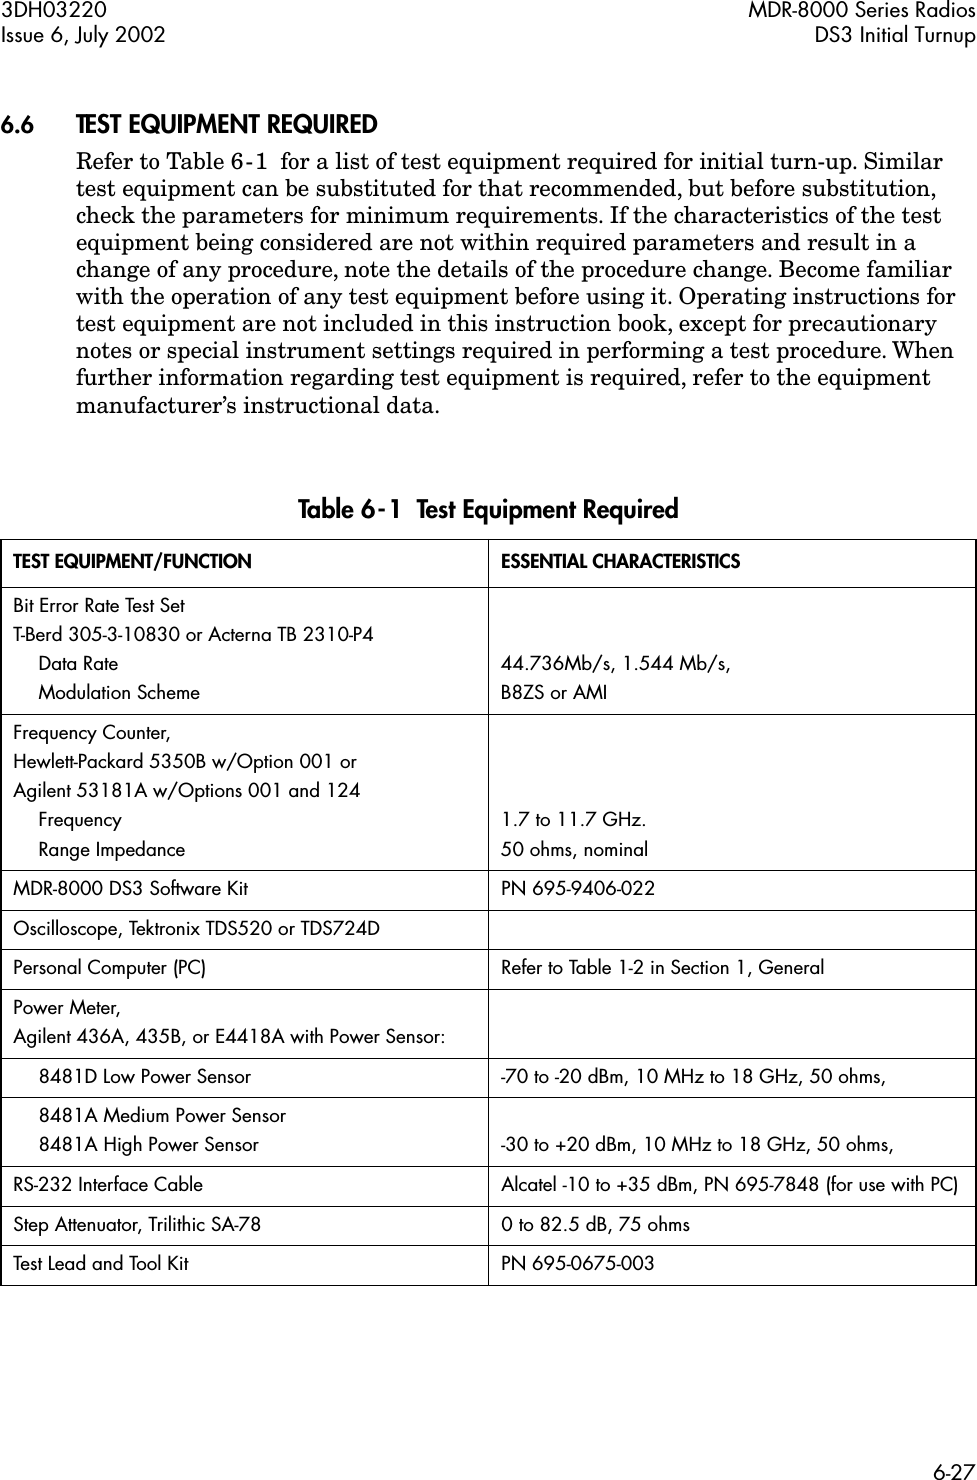  3DH03220 MDR-8000 Series RadiosIssue 6, July 2002 DS3 Initial Turnup6-27 6.6 TEST EQUIPMENT REQUIRED Refer to Table 6-1  for a list of test equipment required for initial turn-up. Similar test equipment can be substituted for that recommended, but before substitution, check the parameters for minimum requirements. If the characteristics of the test equipment being considered are not within required parameters and result in a change of any procedure, note the details of the procedure change. Become familiar with the operation of any test equipment before using it. Operating instructions for test equipment are not included in this instruction book, except for precautionary notes or special instrument settings required in performing a test procedure. When further information regarding test equipment is required, refer to the equipment manufacturer’s instructional data. Table 6-1  Test Equipment Required TEST EQUIPMENT/FUNCTION ESSENTIAL CHARACTERISTICS Bit Error Rate Test Set T-Berd 305-3-10830 or Acterna TB 2310-P4 Data Rate Modulation Scheme44.736Mb/s, 1.544 Mb/s, B8ZS or AMIFrequency Counter, Hewlett-Packard 5350B w/Option 001 or Agilent 53181A w/Options 001 and 124 Frequency Range Impedance1.7 to 11.7 GHz. 50 ohms, nominalMDR-8000 DS3 Software Kit PN 695-9406-022Oscilloscope, Tektronix TDS520 or TDS724DPersonal Computer (PC) Refer to Table 1-2 in Section 1, GeneralPower Meter, Agilent 436A, 435B, or E4418A with Power Sensor:8481D Low Power Sensor -70 to -20 dBm, 10 MHz to 18 GHz, 50 ohms,8481A Medium Power Sensor8481A High Power Sensor -30 to +20 dBm, 10 MHz to 18 GHz, 50 ohms,RS-232 Interface Cable Alcatel -10 to +35 dBm, PN 695-7848 (for use with PC)Step Attenuator, Trilithic SA-78 0 to 82.5 dB, 75 ohmsTest Lead and Tool Kit PN 695-0675-003